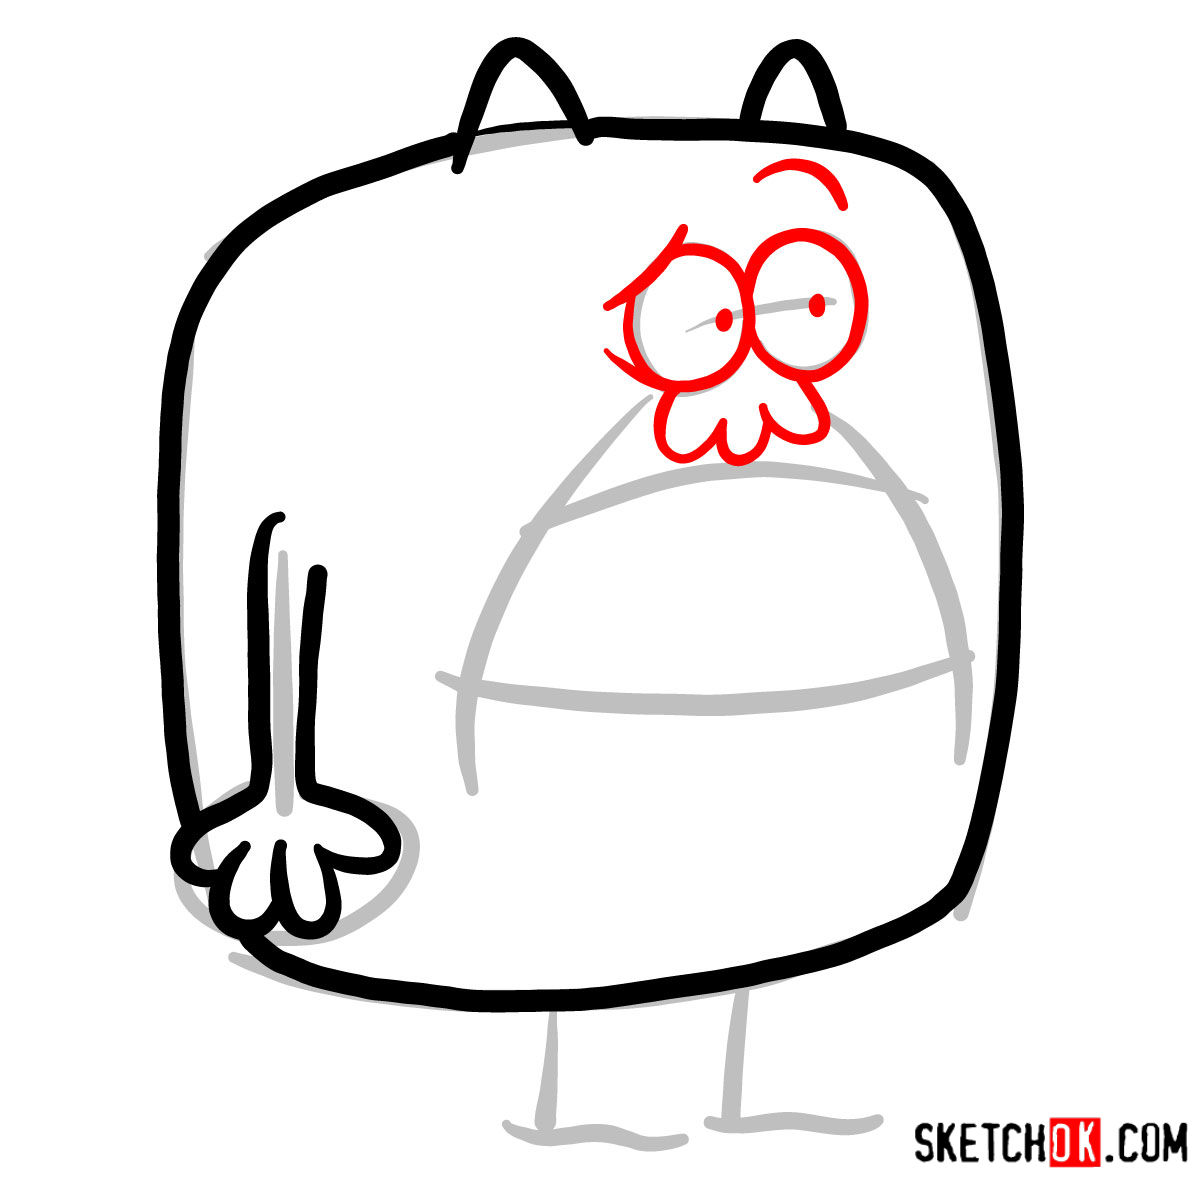 How to draw Chestnut from Chowder - step 03